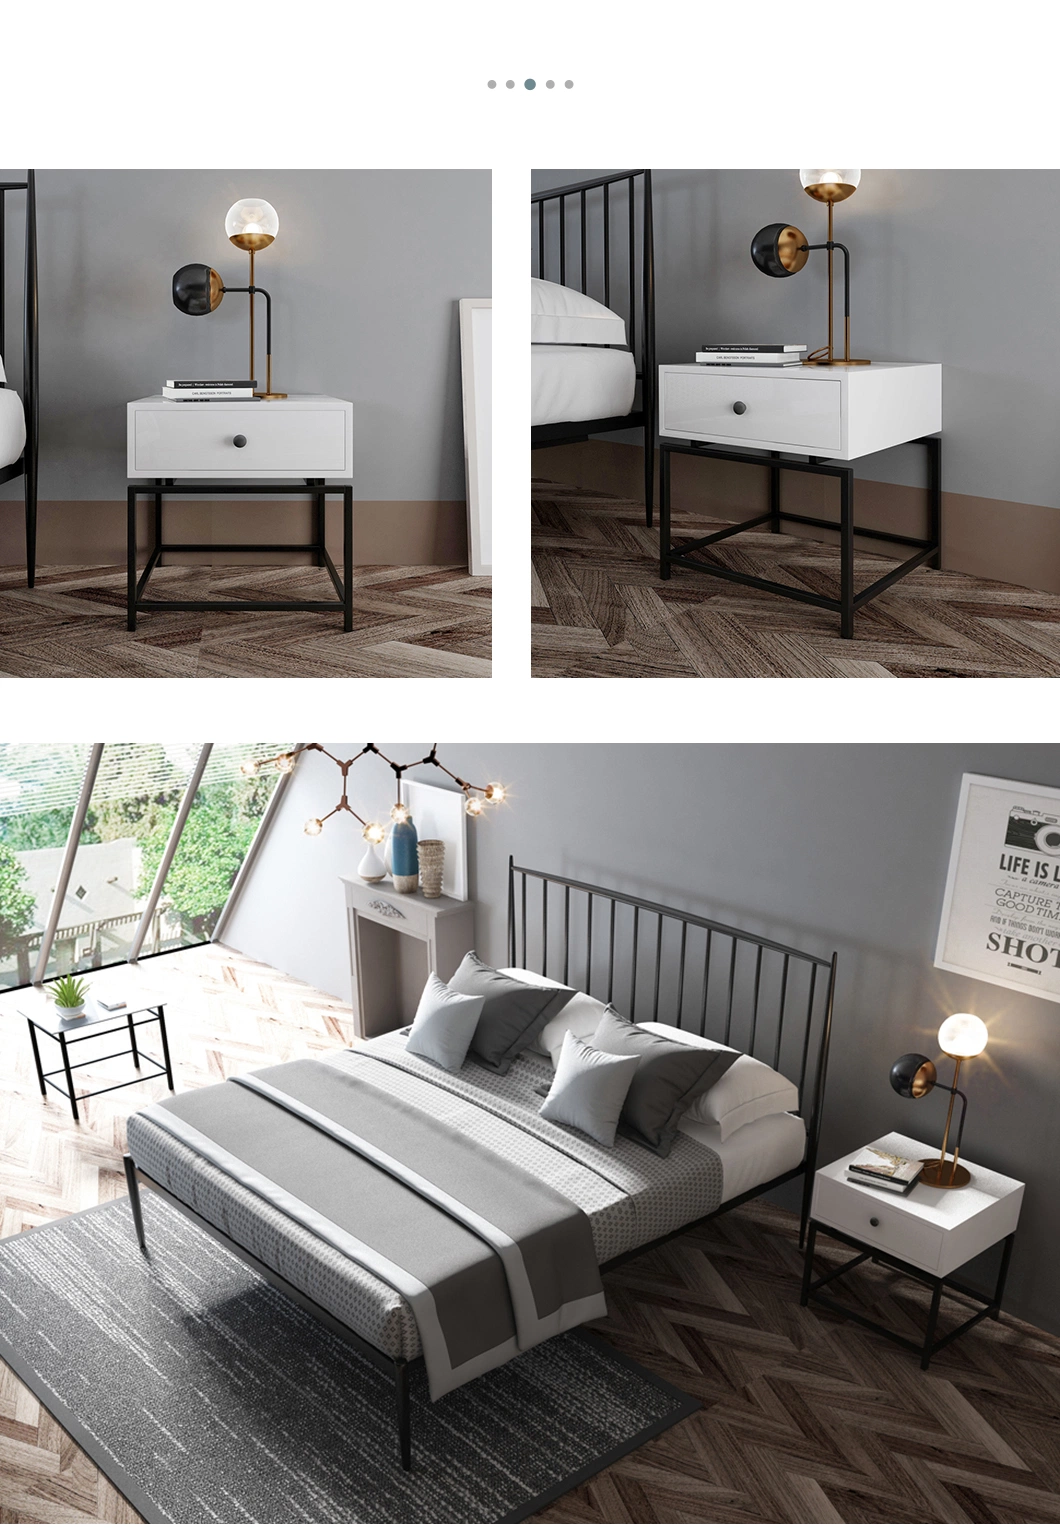 Modern Style Adult King Size Wooden Double Bed Home Bedroom Furniture